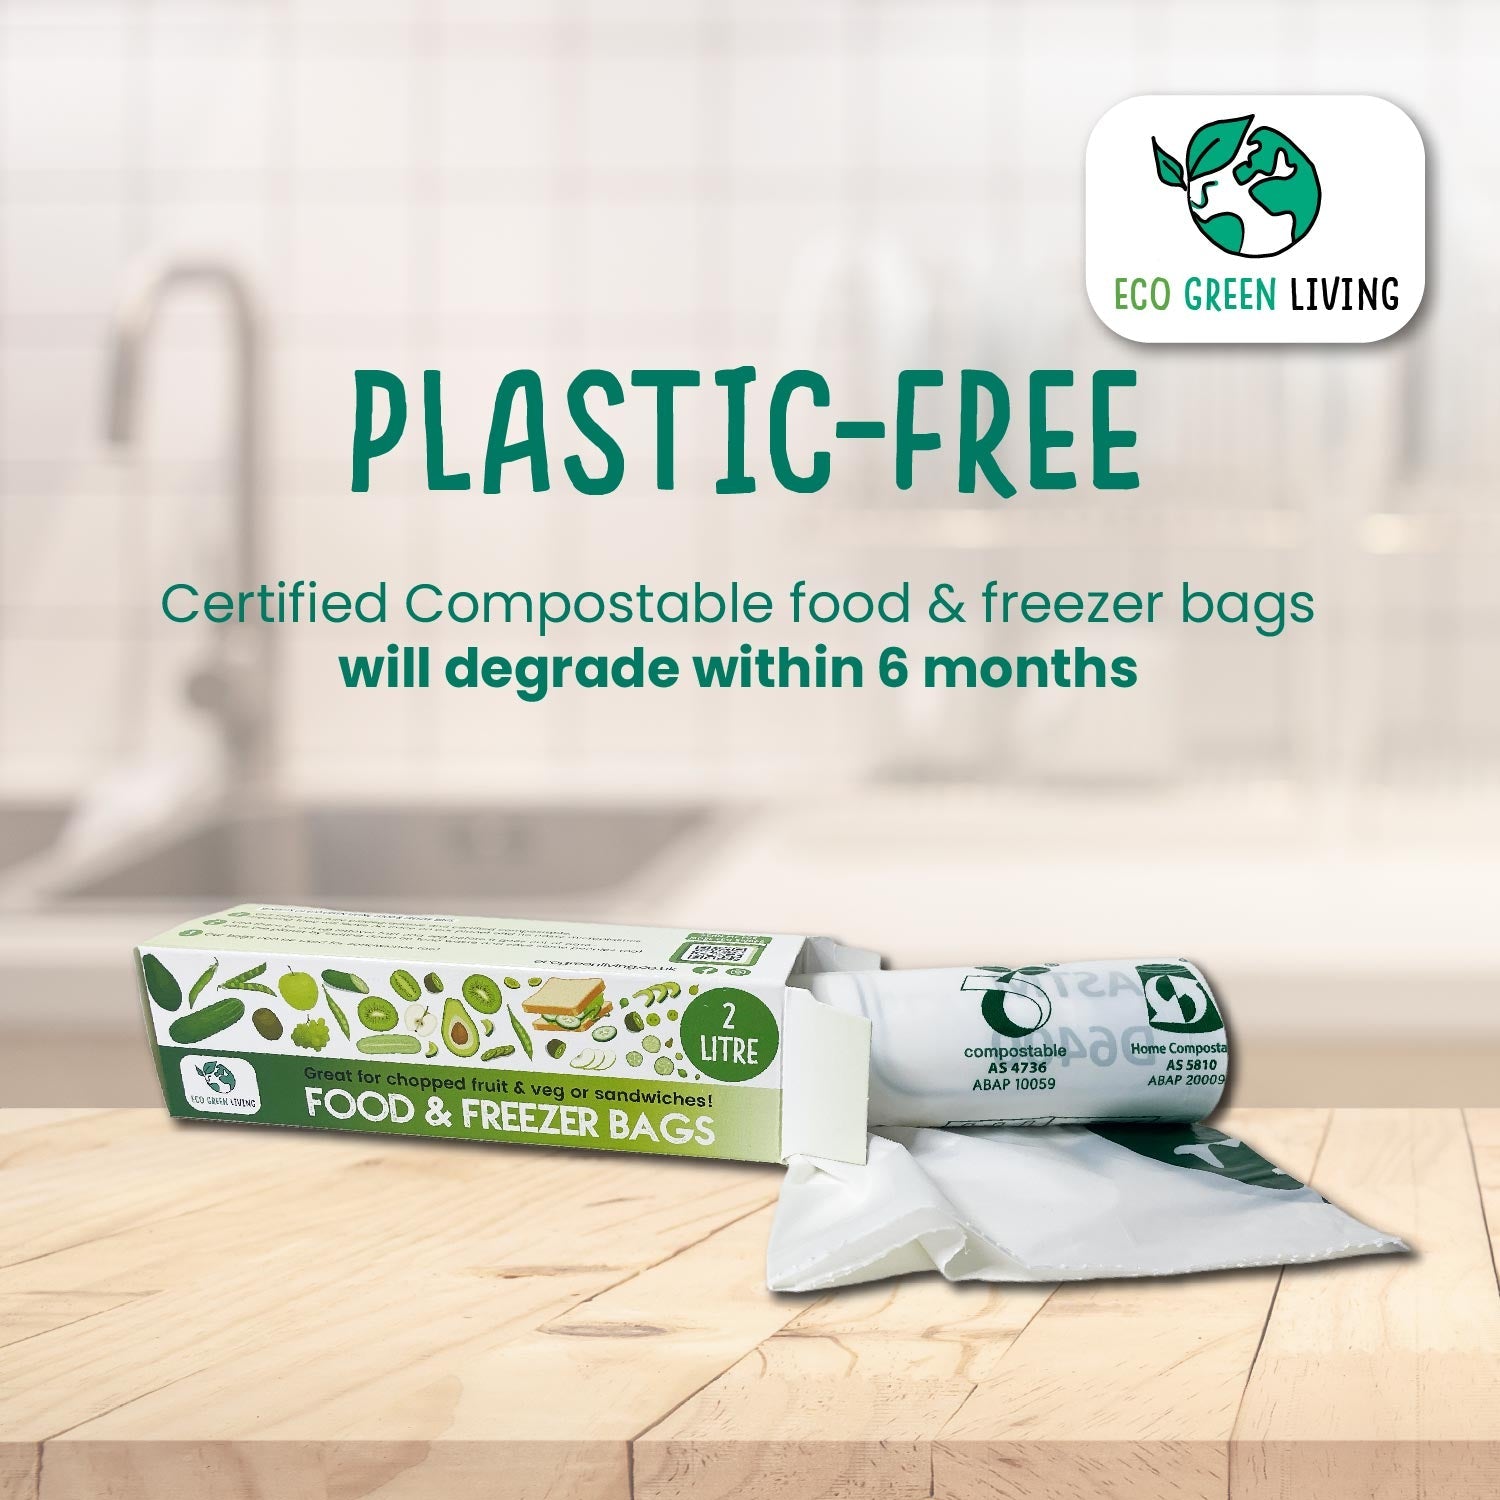 Certified Compostable Food & Freezer Bags Pack 4 Litre & 6 Litre (90 bags total) - Eco Green Living